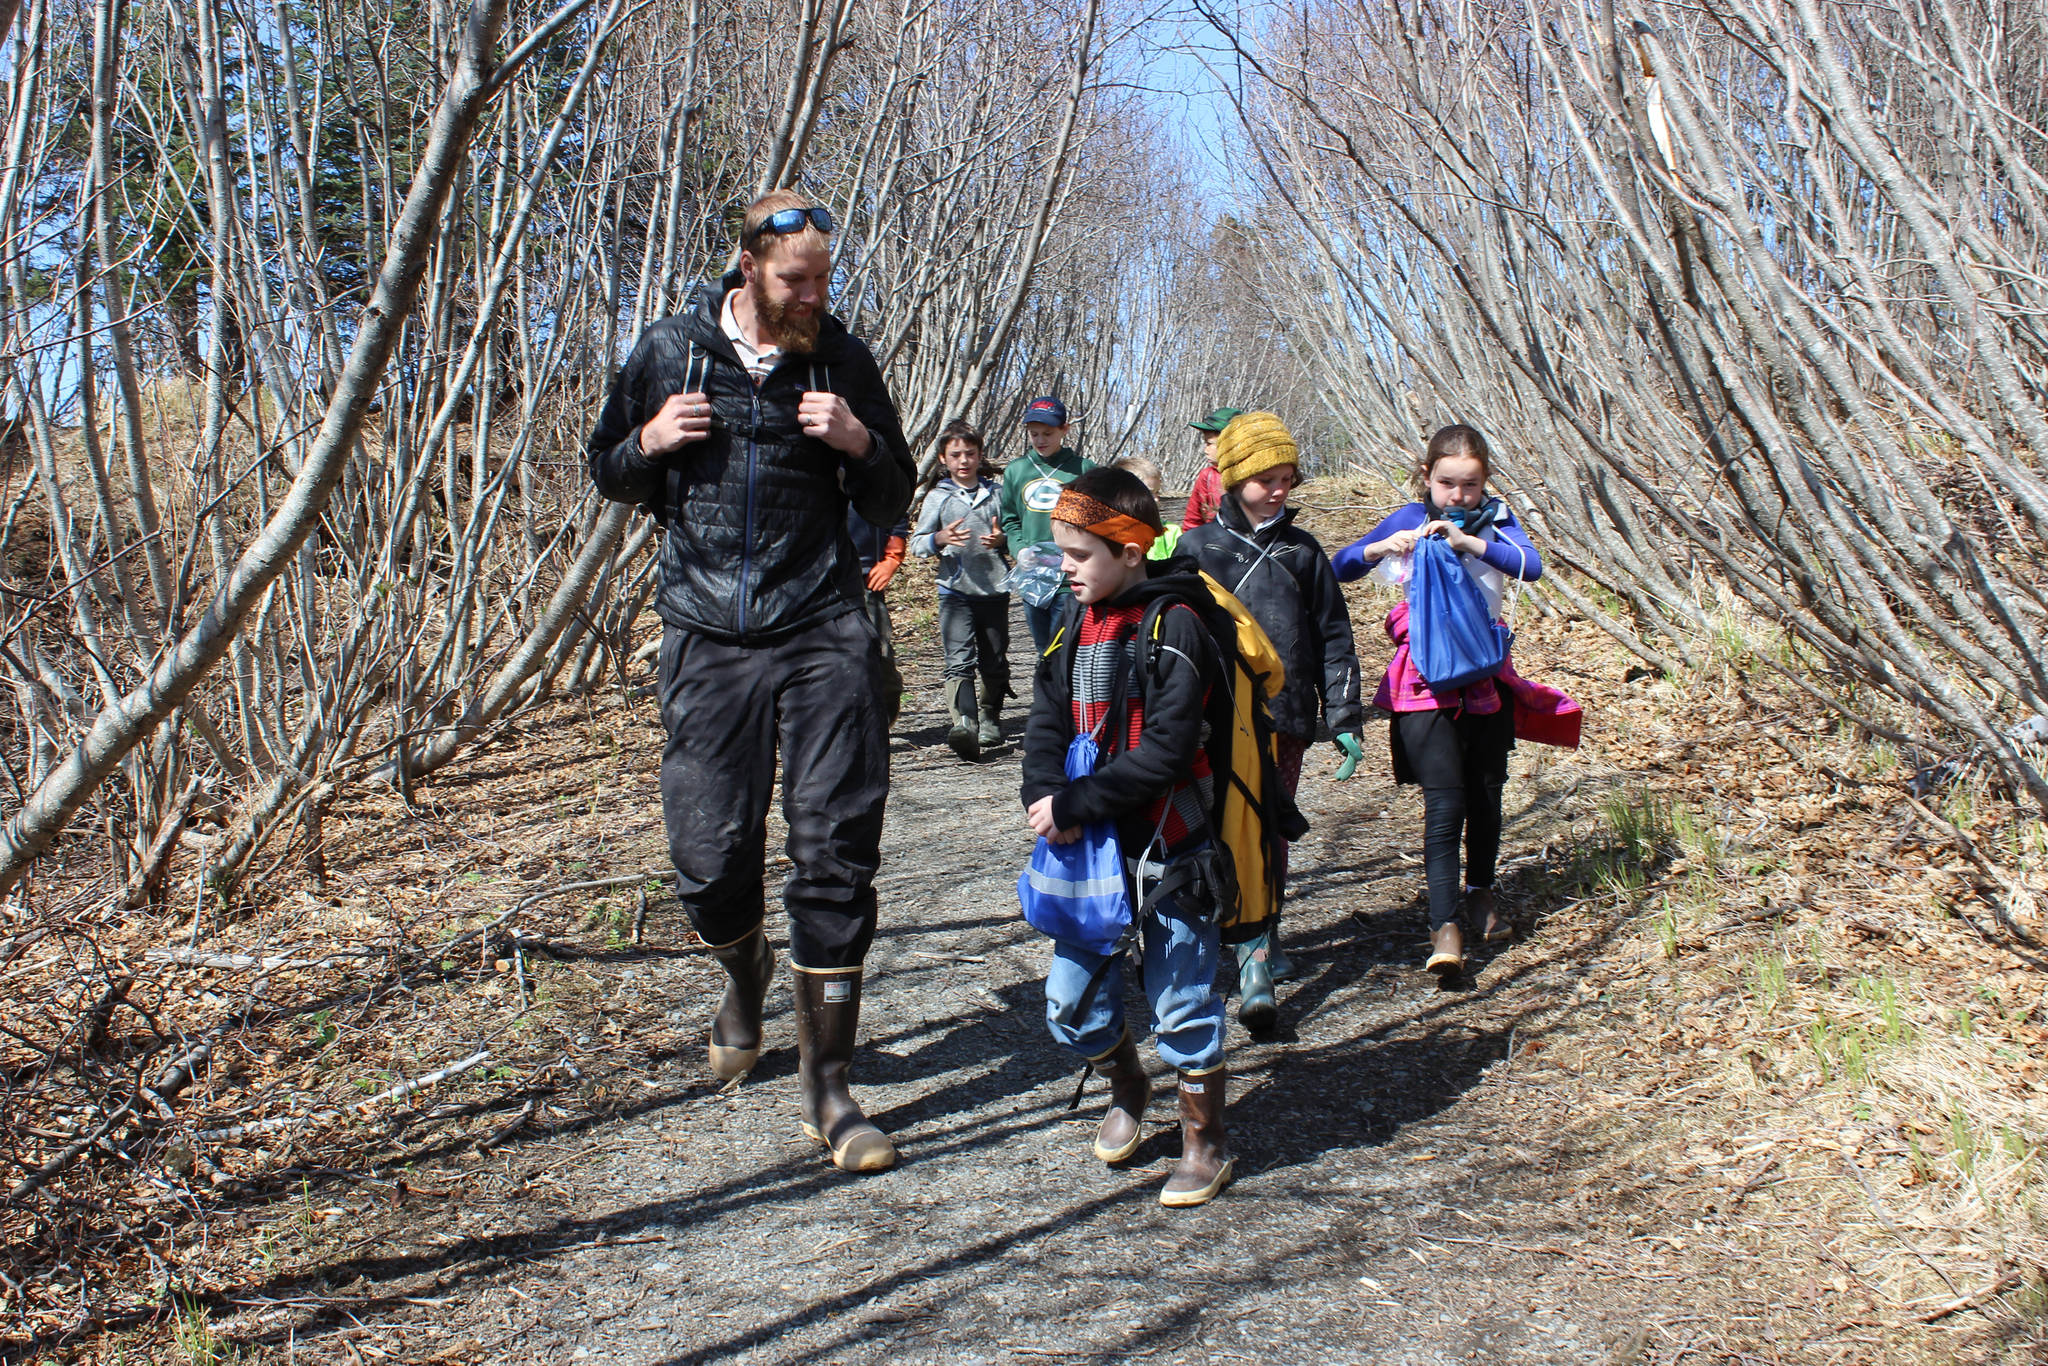 Elementary school students in the Kenai Peninsula Borough School District’s after-school Wilderness Explorers program head down Diamond Creek Trail on Wednesday, May 2, for an afternoon of identifying, collecting and eating edible wild plants. Adult volunteer Derek Brynagle walks with students (front, left to right) Alexander Kulikov, Maddy Miotke, Britta Velsko and (back, left to right) Lars Dickson, Mavricky Kulikov and Ellis Lorentz. (Photo by McKibben Jackinsky)